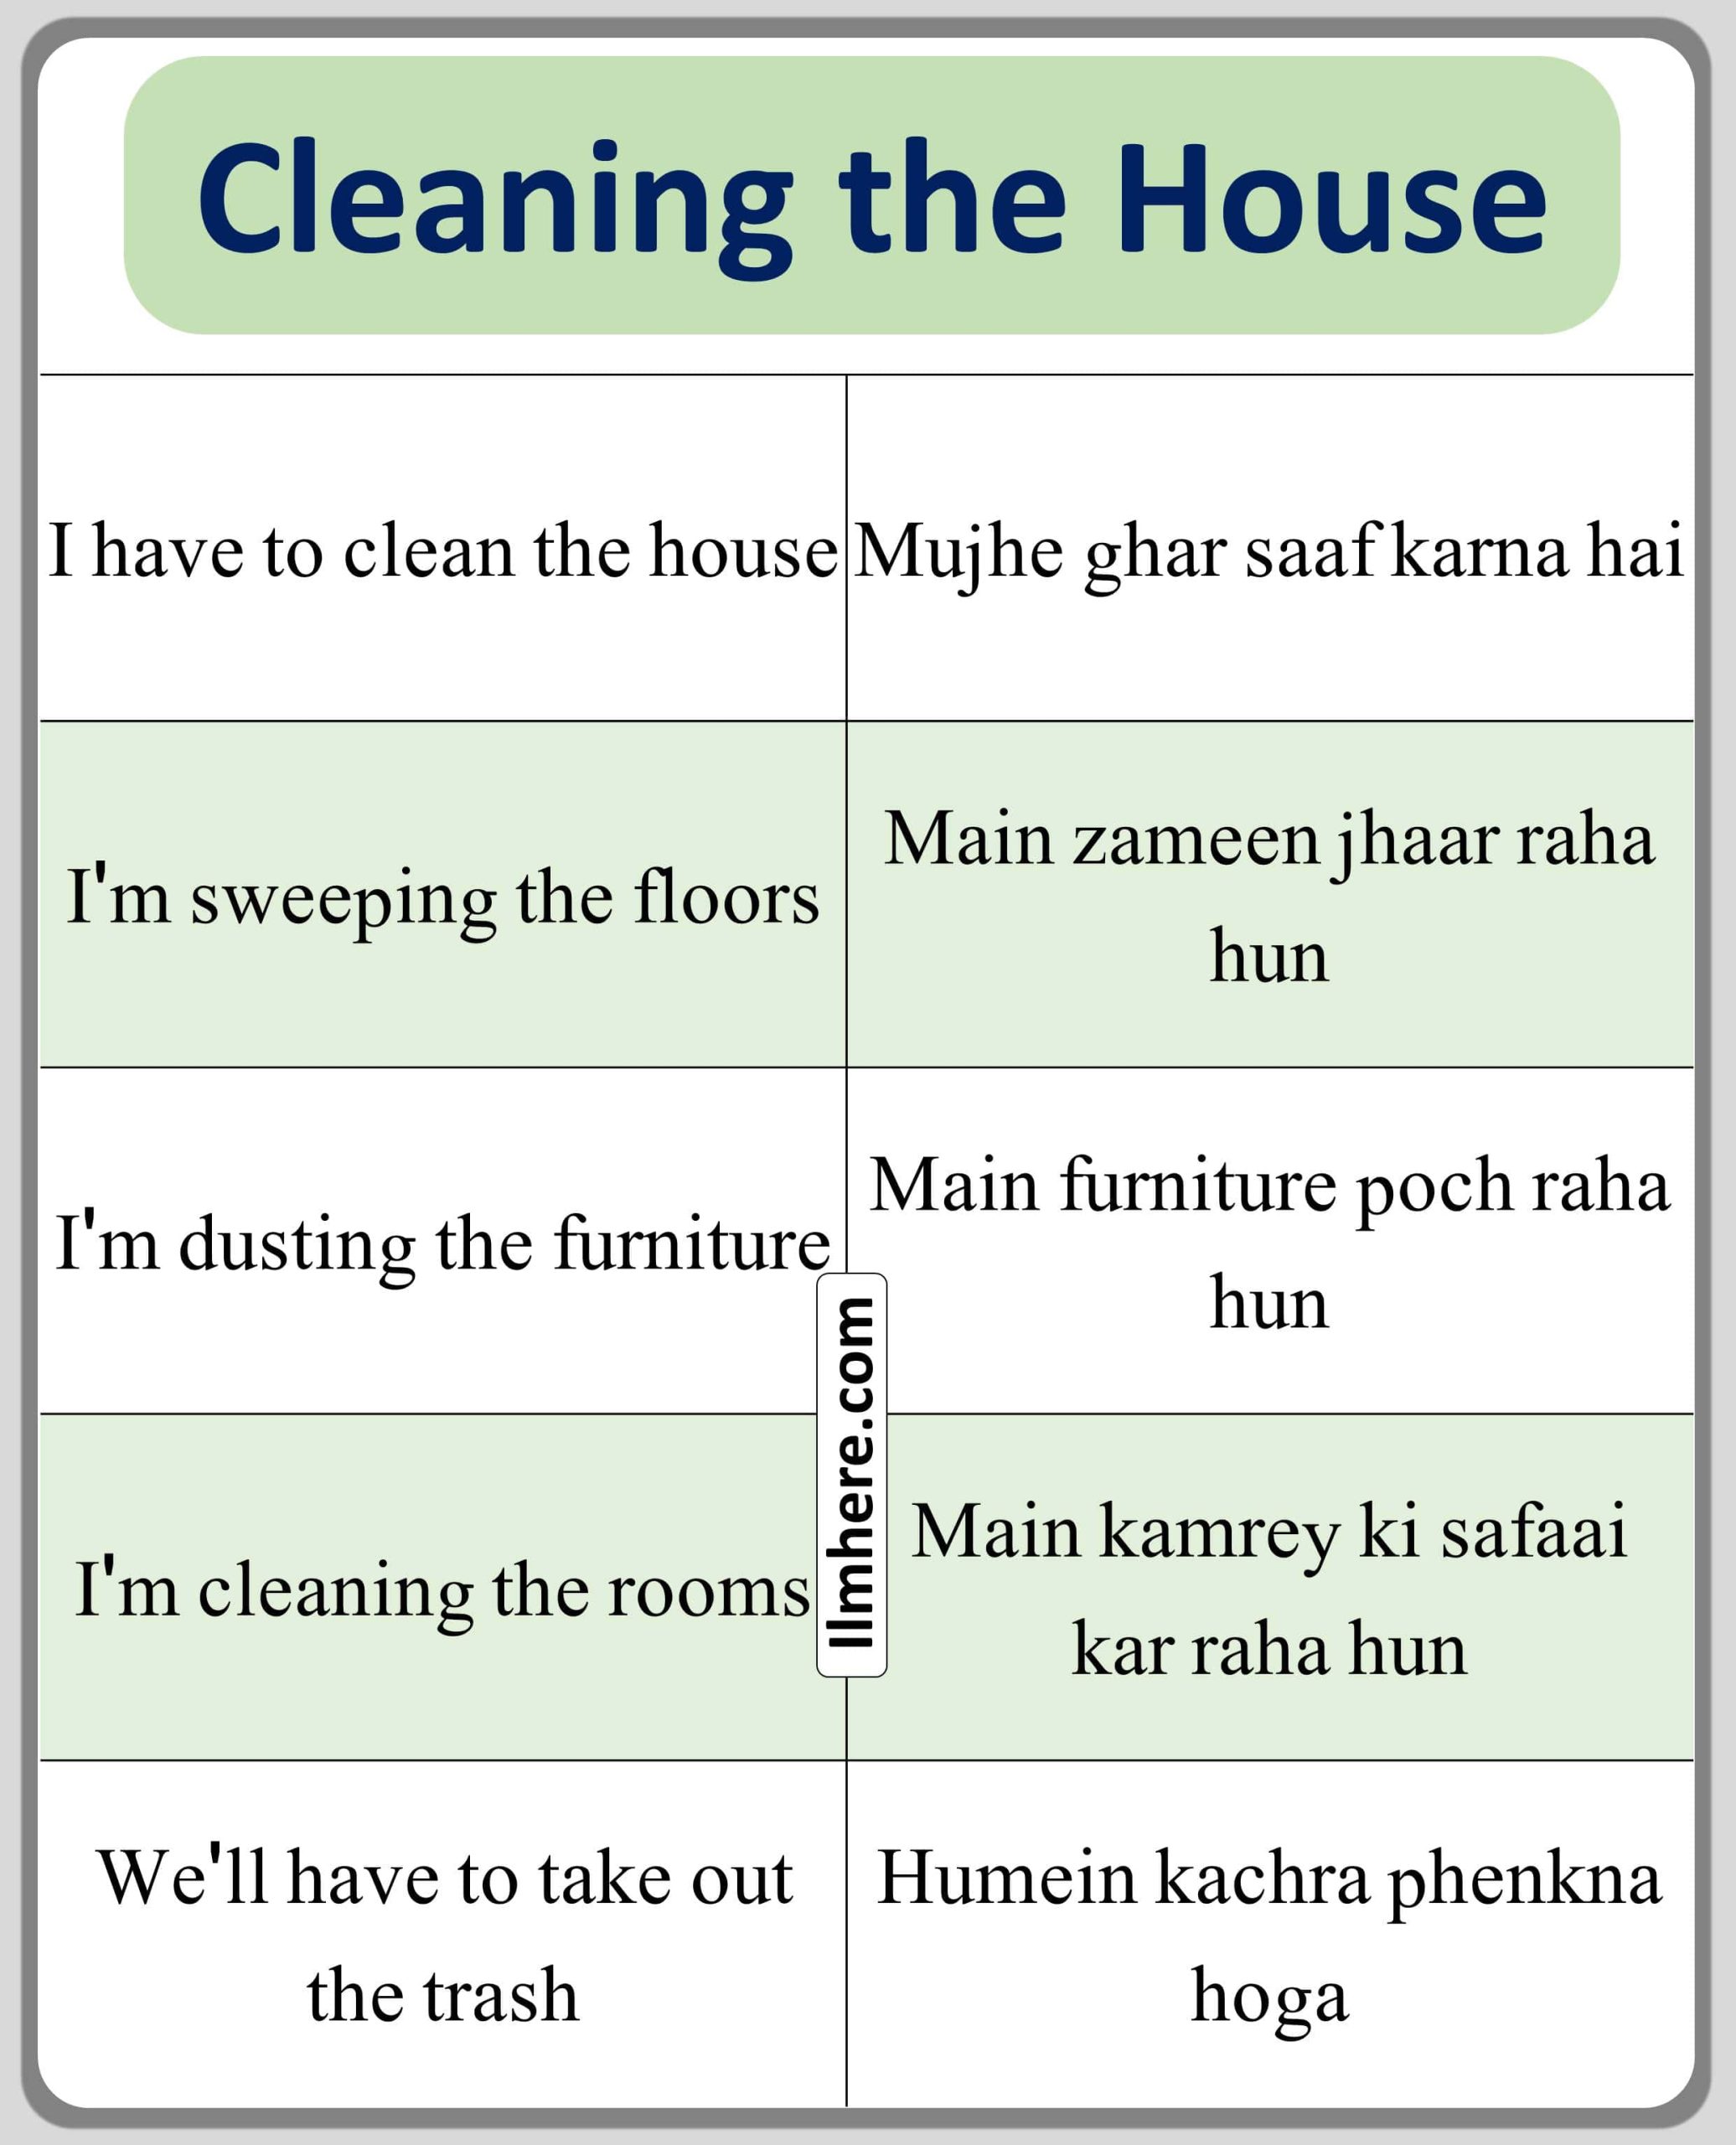 Cleaning the House Urdu to English Sentences for Household Chore